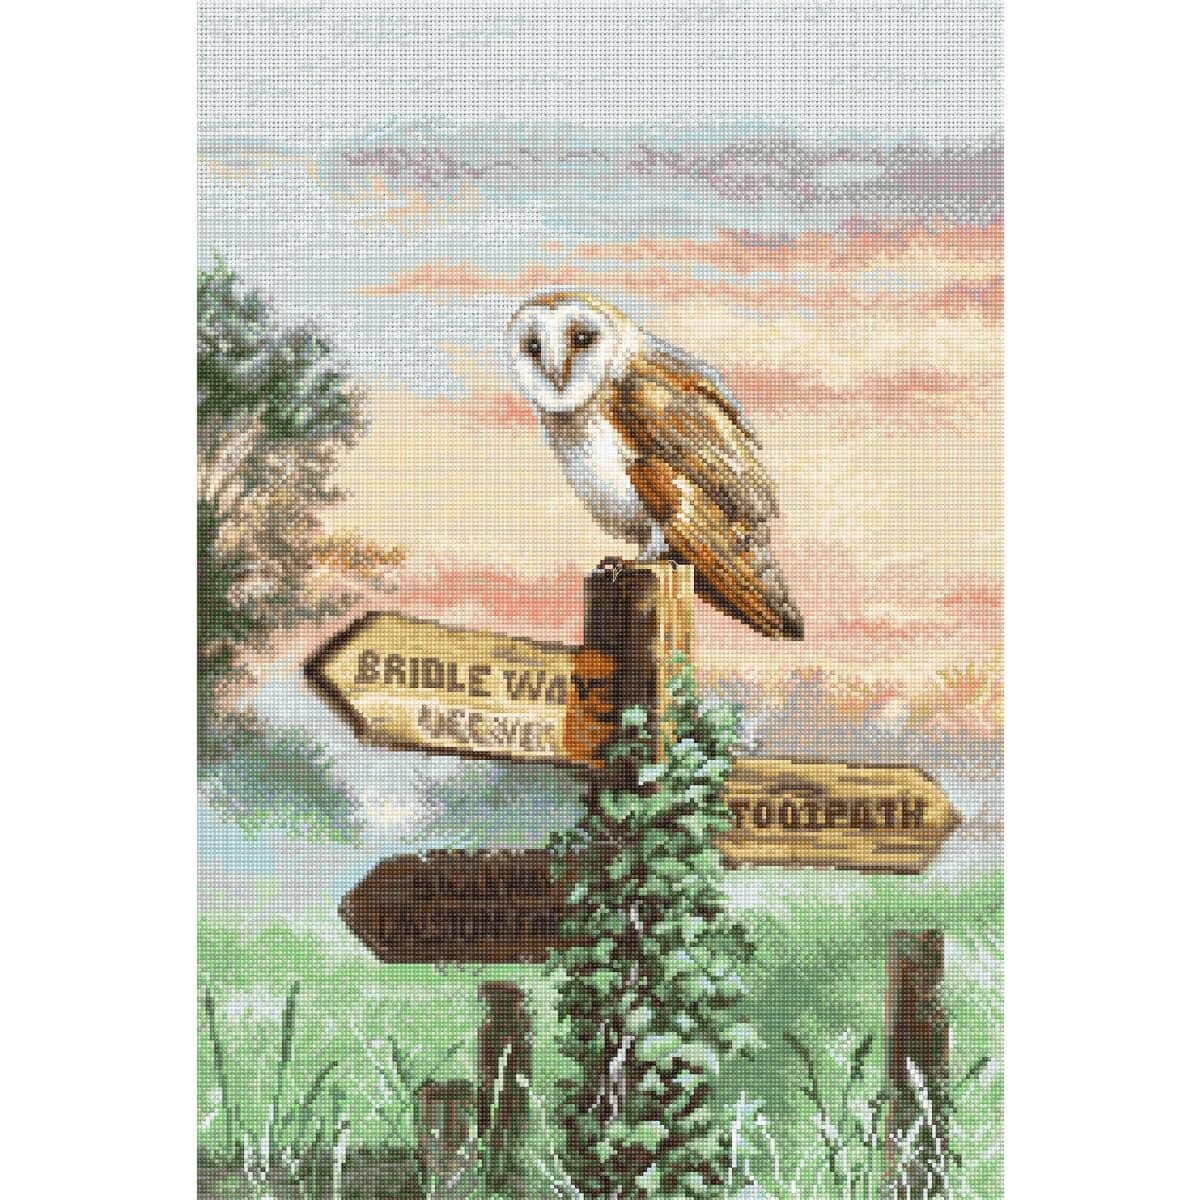 Letistitch counted cross stitch kit "Barn Owl",...